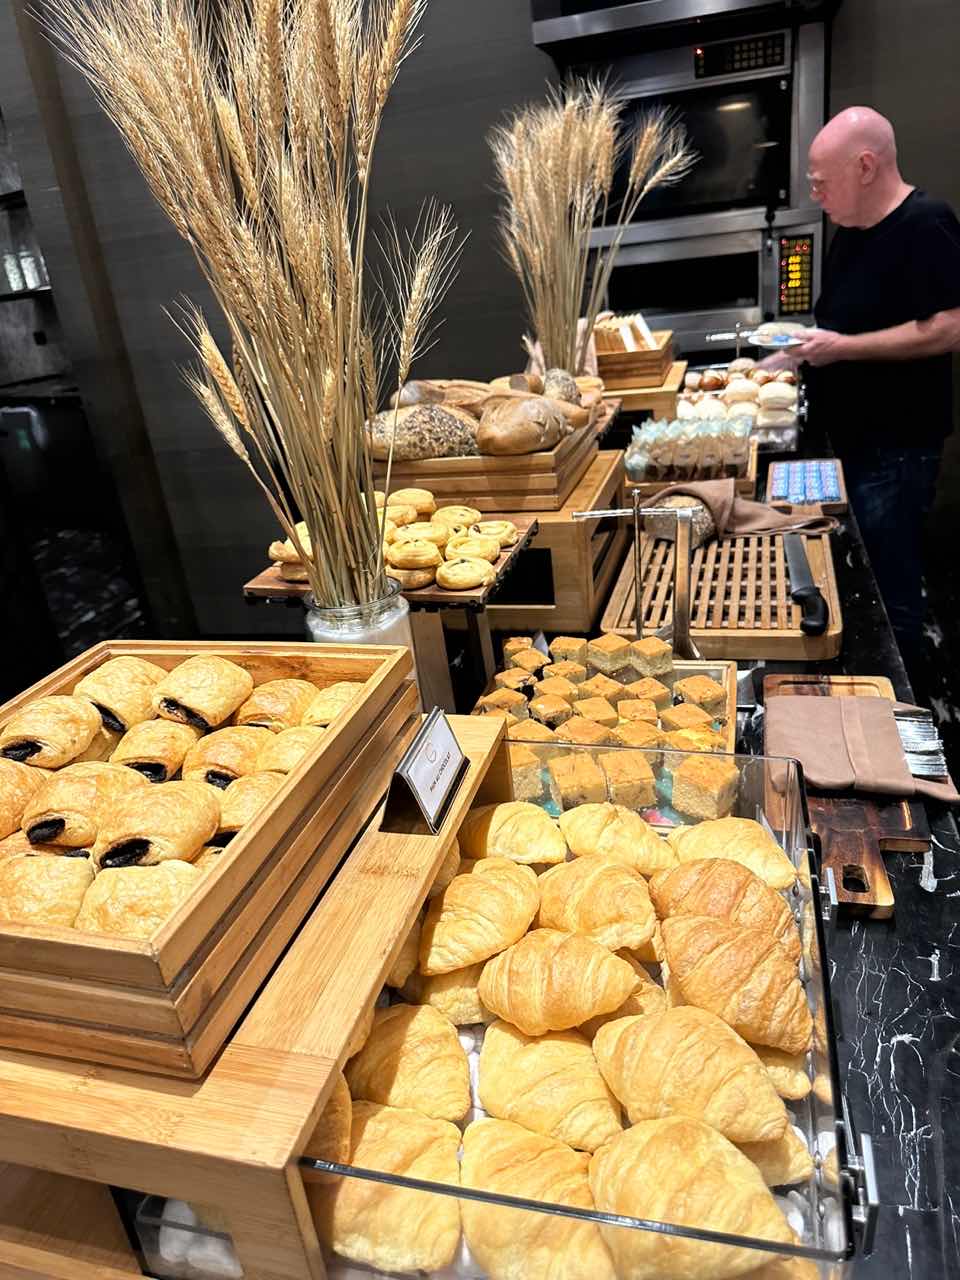 Pastries and bread